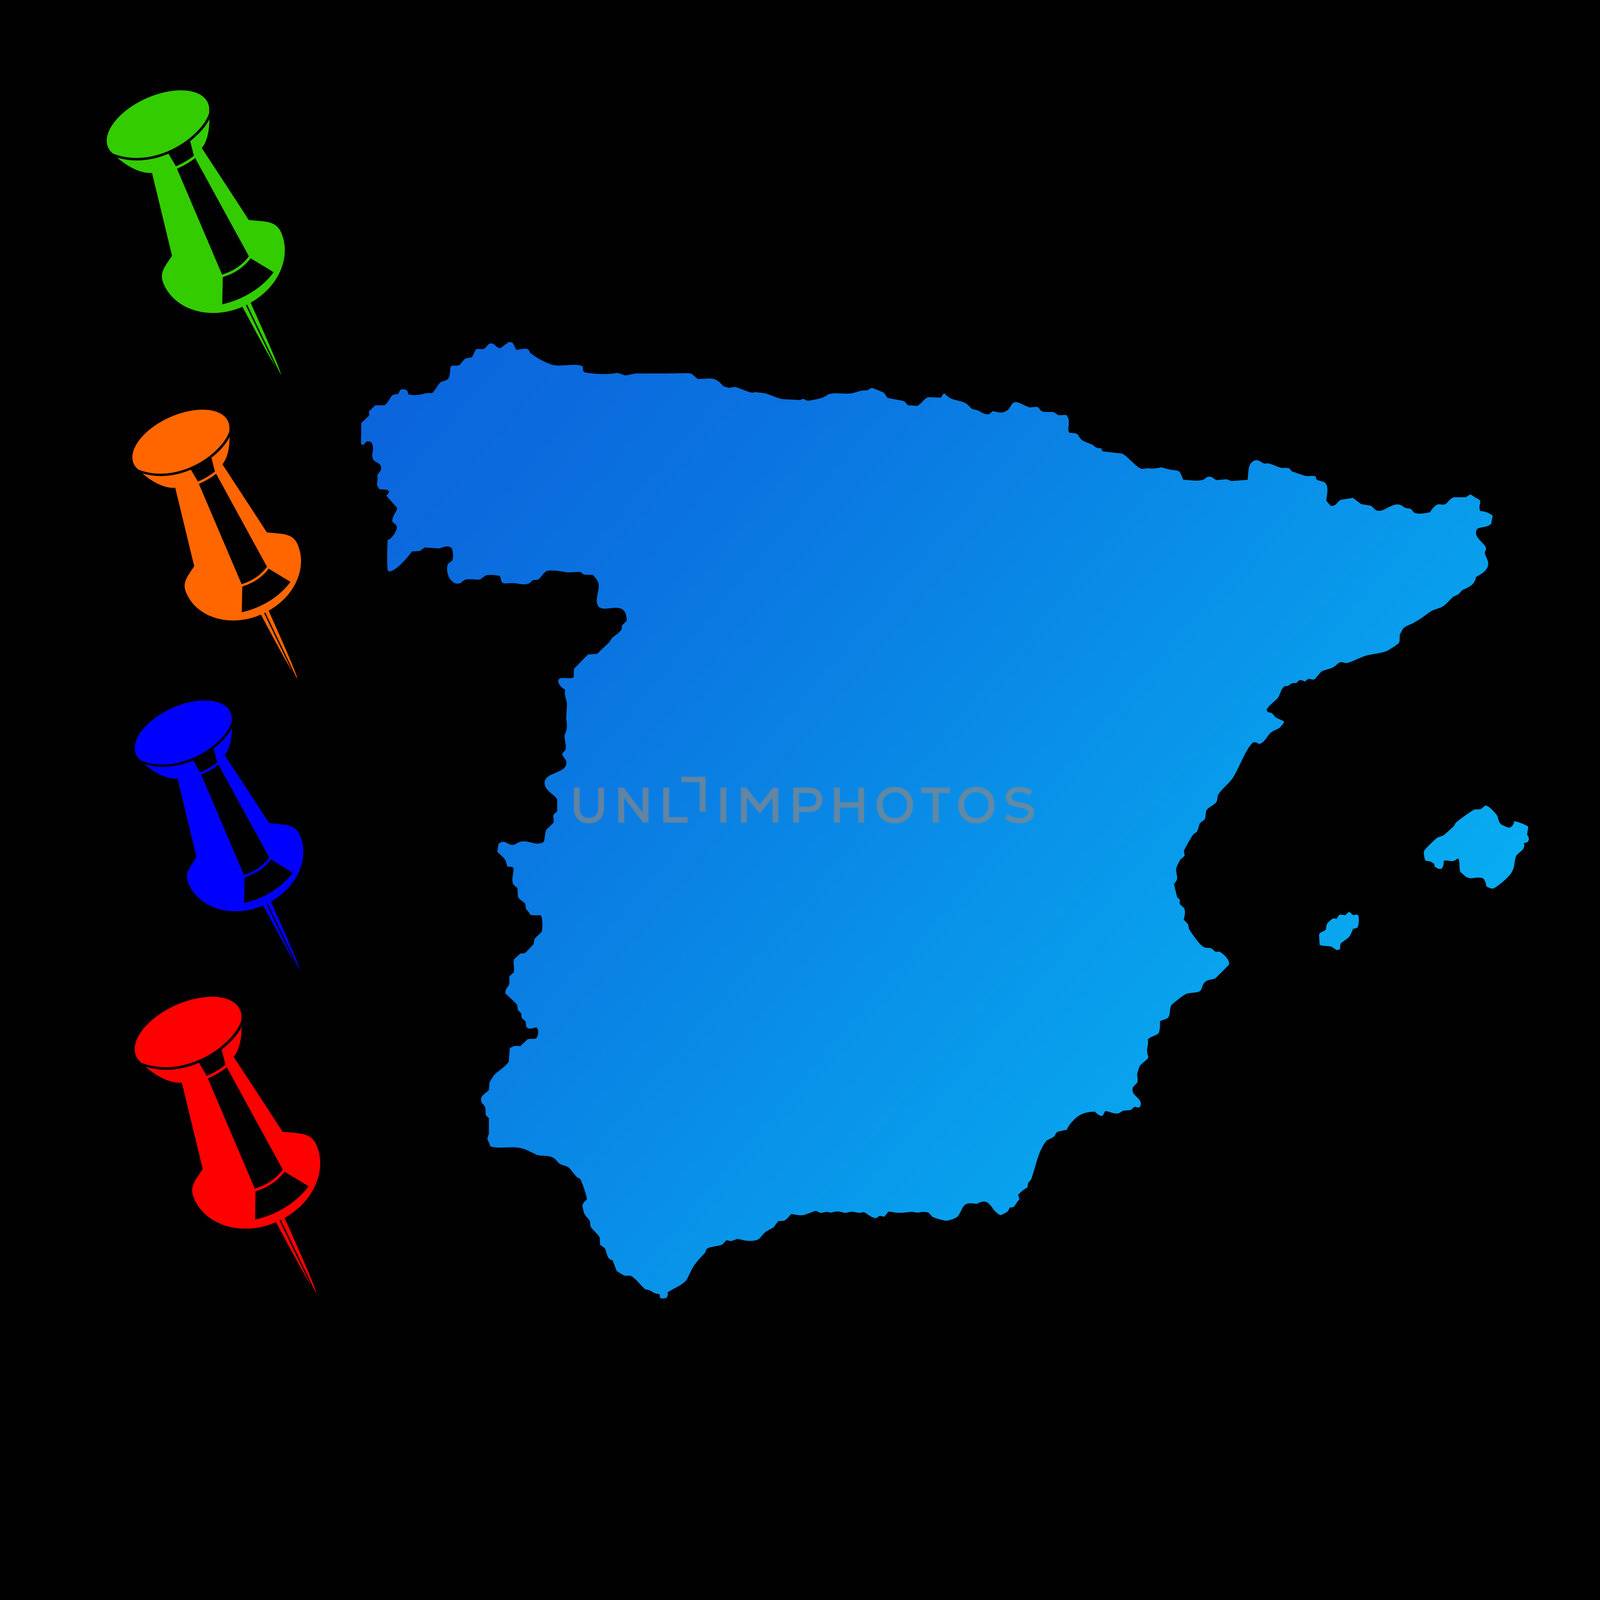 Spain travel map by speedfighter